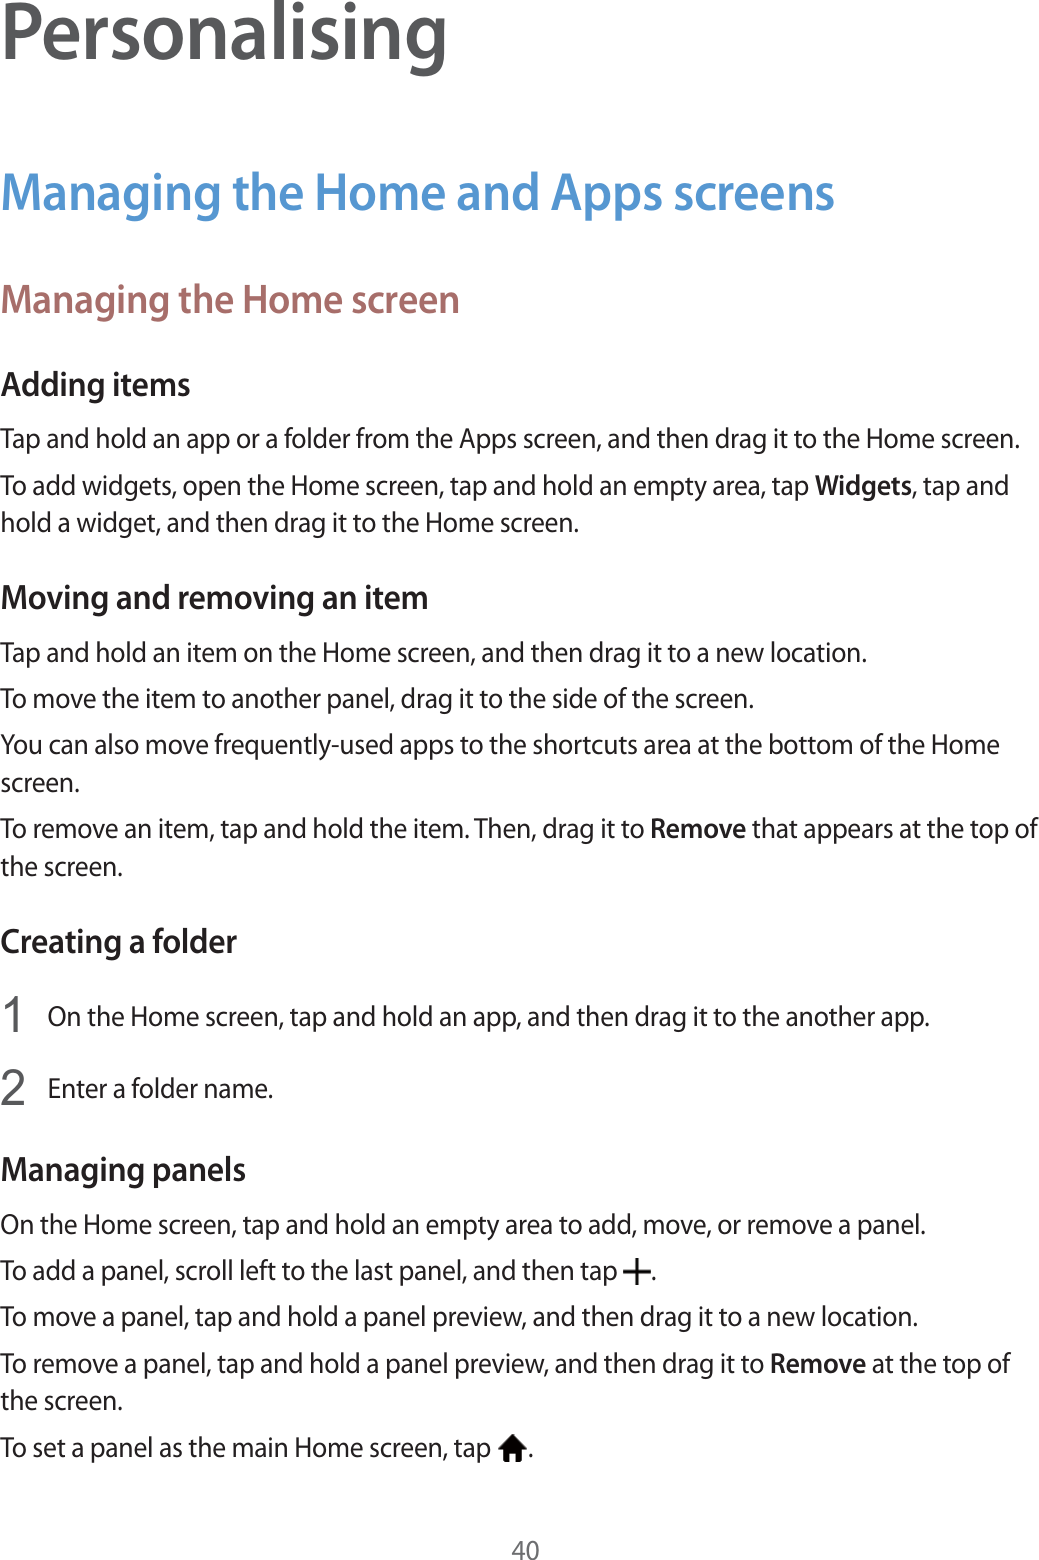 40PersonalisingManaging the Home and Apps screensManaging the Home screenAdding itemsTap and hold an app or a folder from the Apps screen, and then drag it to the Home screen.To add widgets, open the Home screen, tap and hold an empty area, tap Widgets, tap and hold a widget, and then drag it to the Home screen.Moving and removing an itemTap and hold an item on the Home screen, and then drag it to a new location.To move the item to another panel, drag it to the side of the screen.You can also move frequently-used apps to the shortcuts area at the bottom of the Home screen.To remove an item, tap and hold the item. Then, drag it to Remove that appears at the top of the screen.Creating a folder1On the Home screen, tap and hold an app, and then drag it to the another app.2Enter a folder name.Managing panelsOn the Home screen, tap and hold an empty area to add, move, or remove a panel.To add a panel, scroll left to the last panel, and then tap  .To move a panel, tap and hold a panel preview, and then drag it to a new location.To remove a panel, tap and hold a panel preview, and then drag it to Remove at the top of the screen.To set a panel as the main Home screen, tap  .